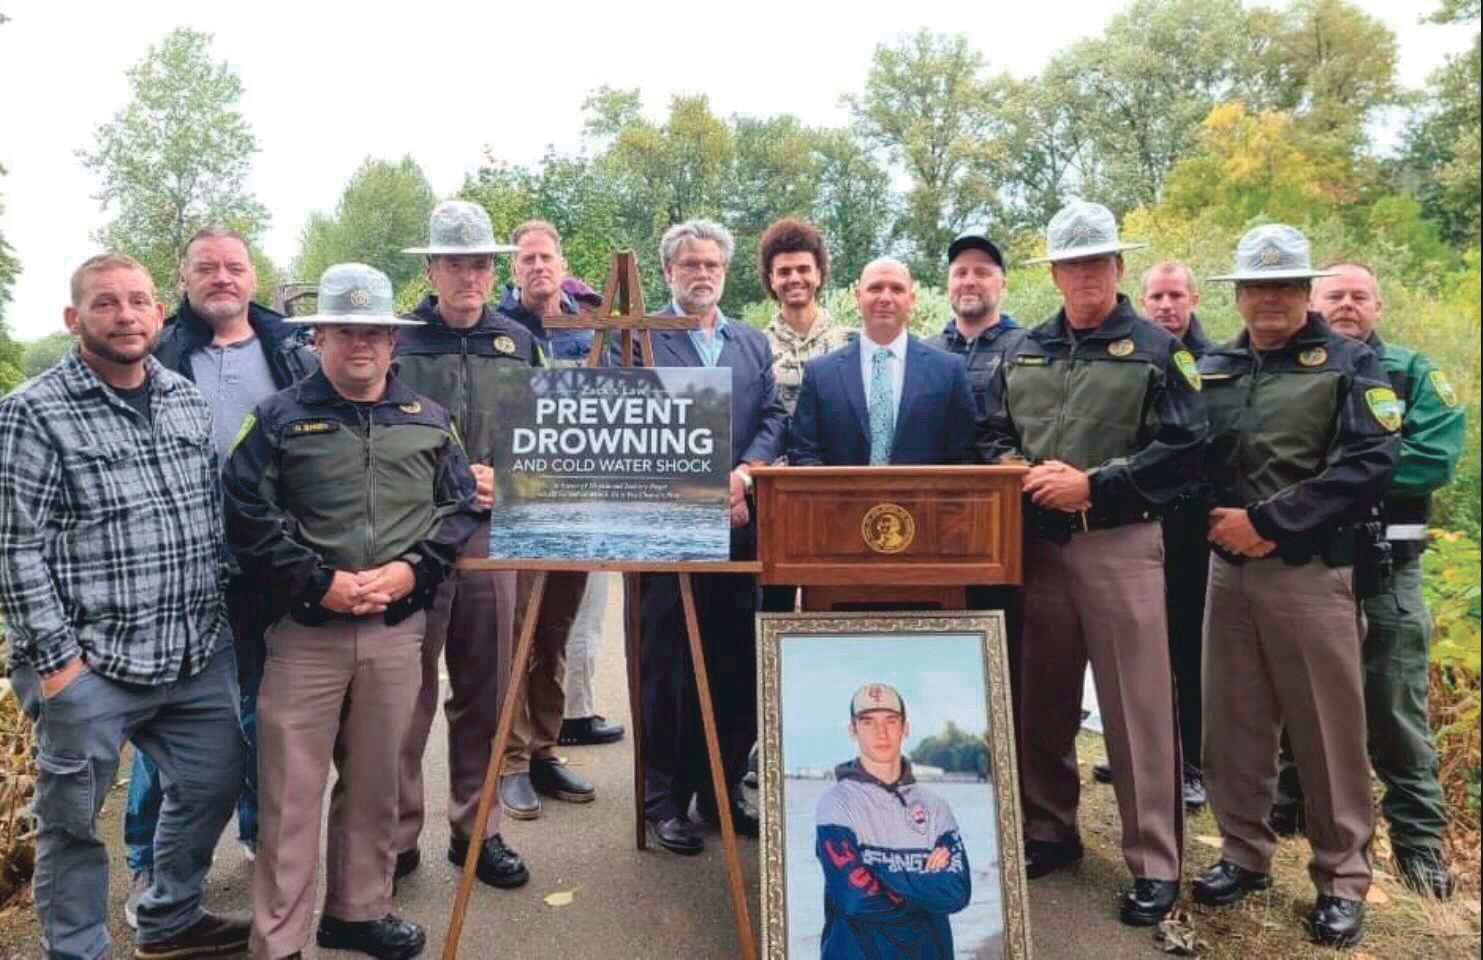 Community leaders, law enforcement and family of Zachary Rager pose for a photo along the Willapa Hills Trail during an event last September raising awareness around cold water shock to prevent drownings.